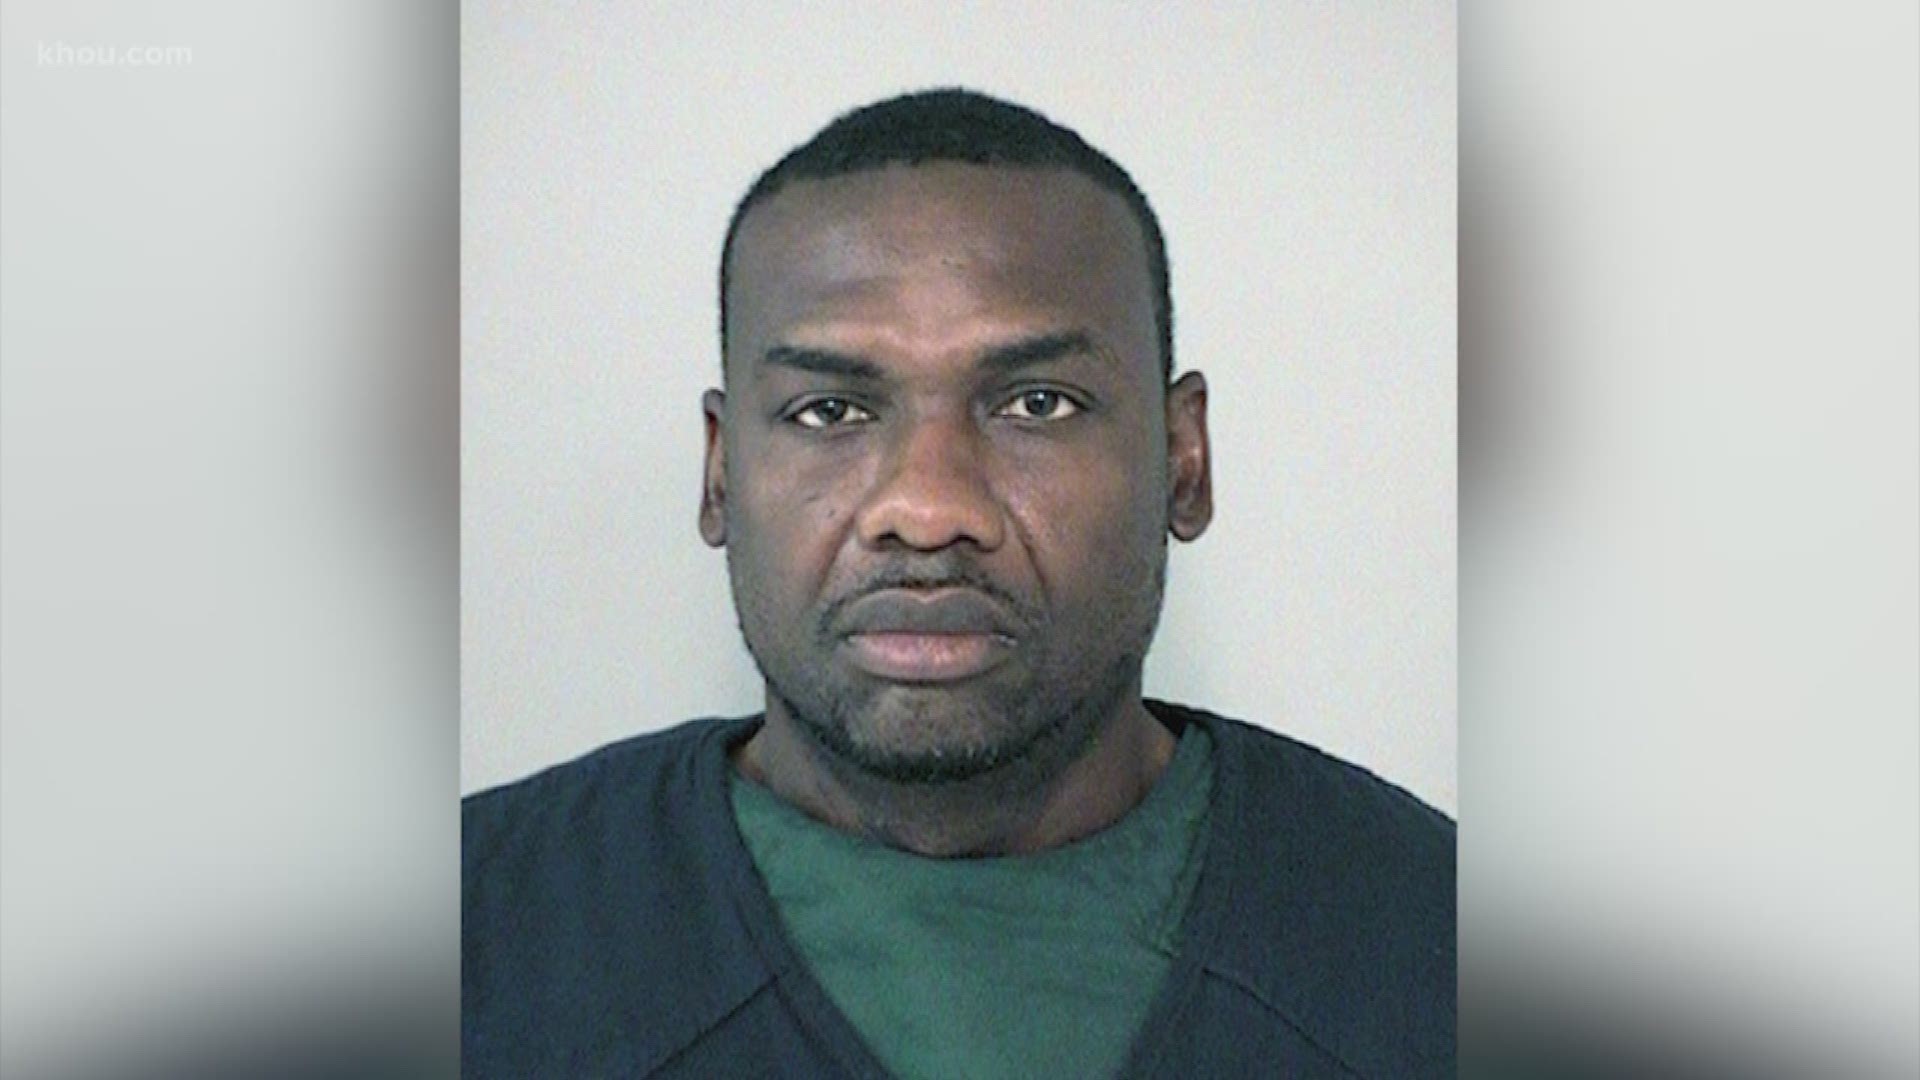 Police have identified the man arrested after a woman's murder outside a Sugar Land hotel.